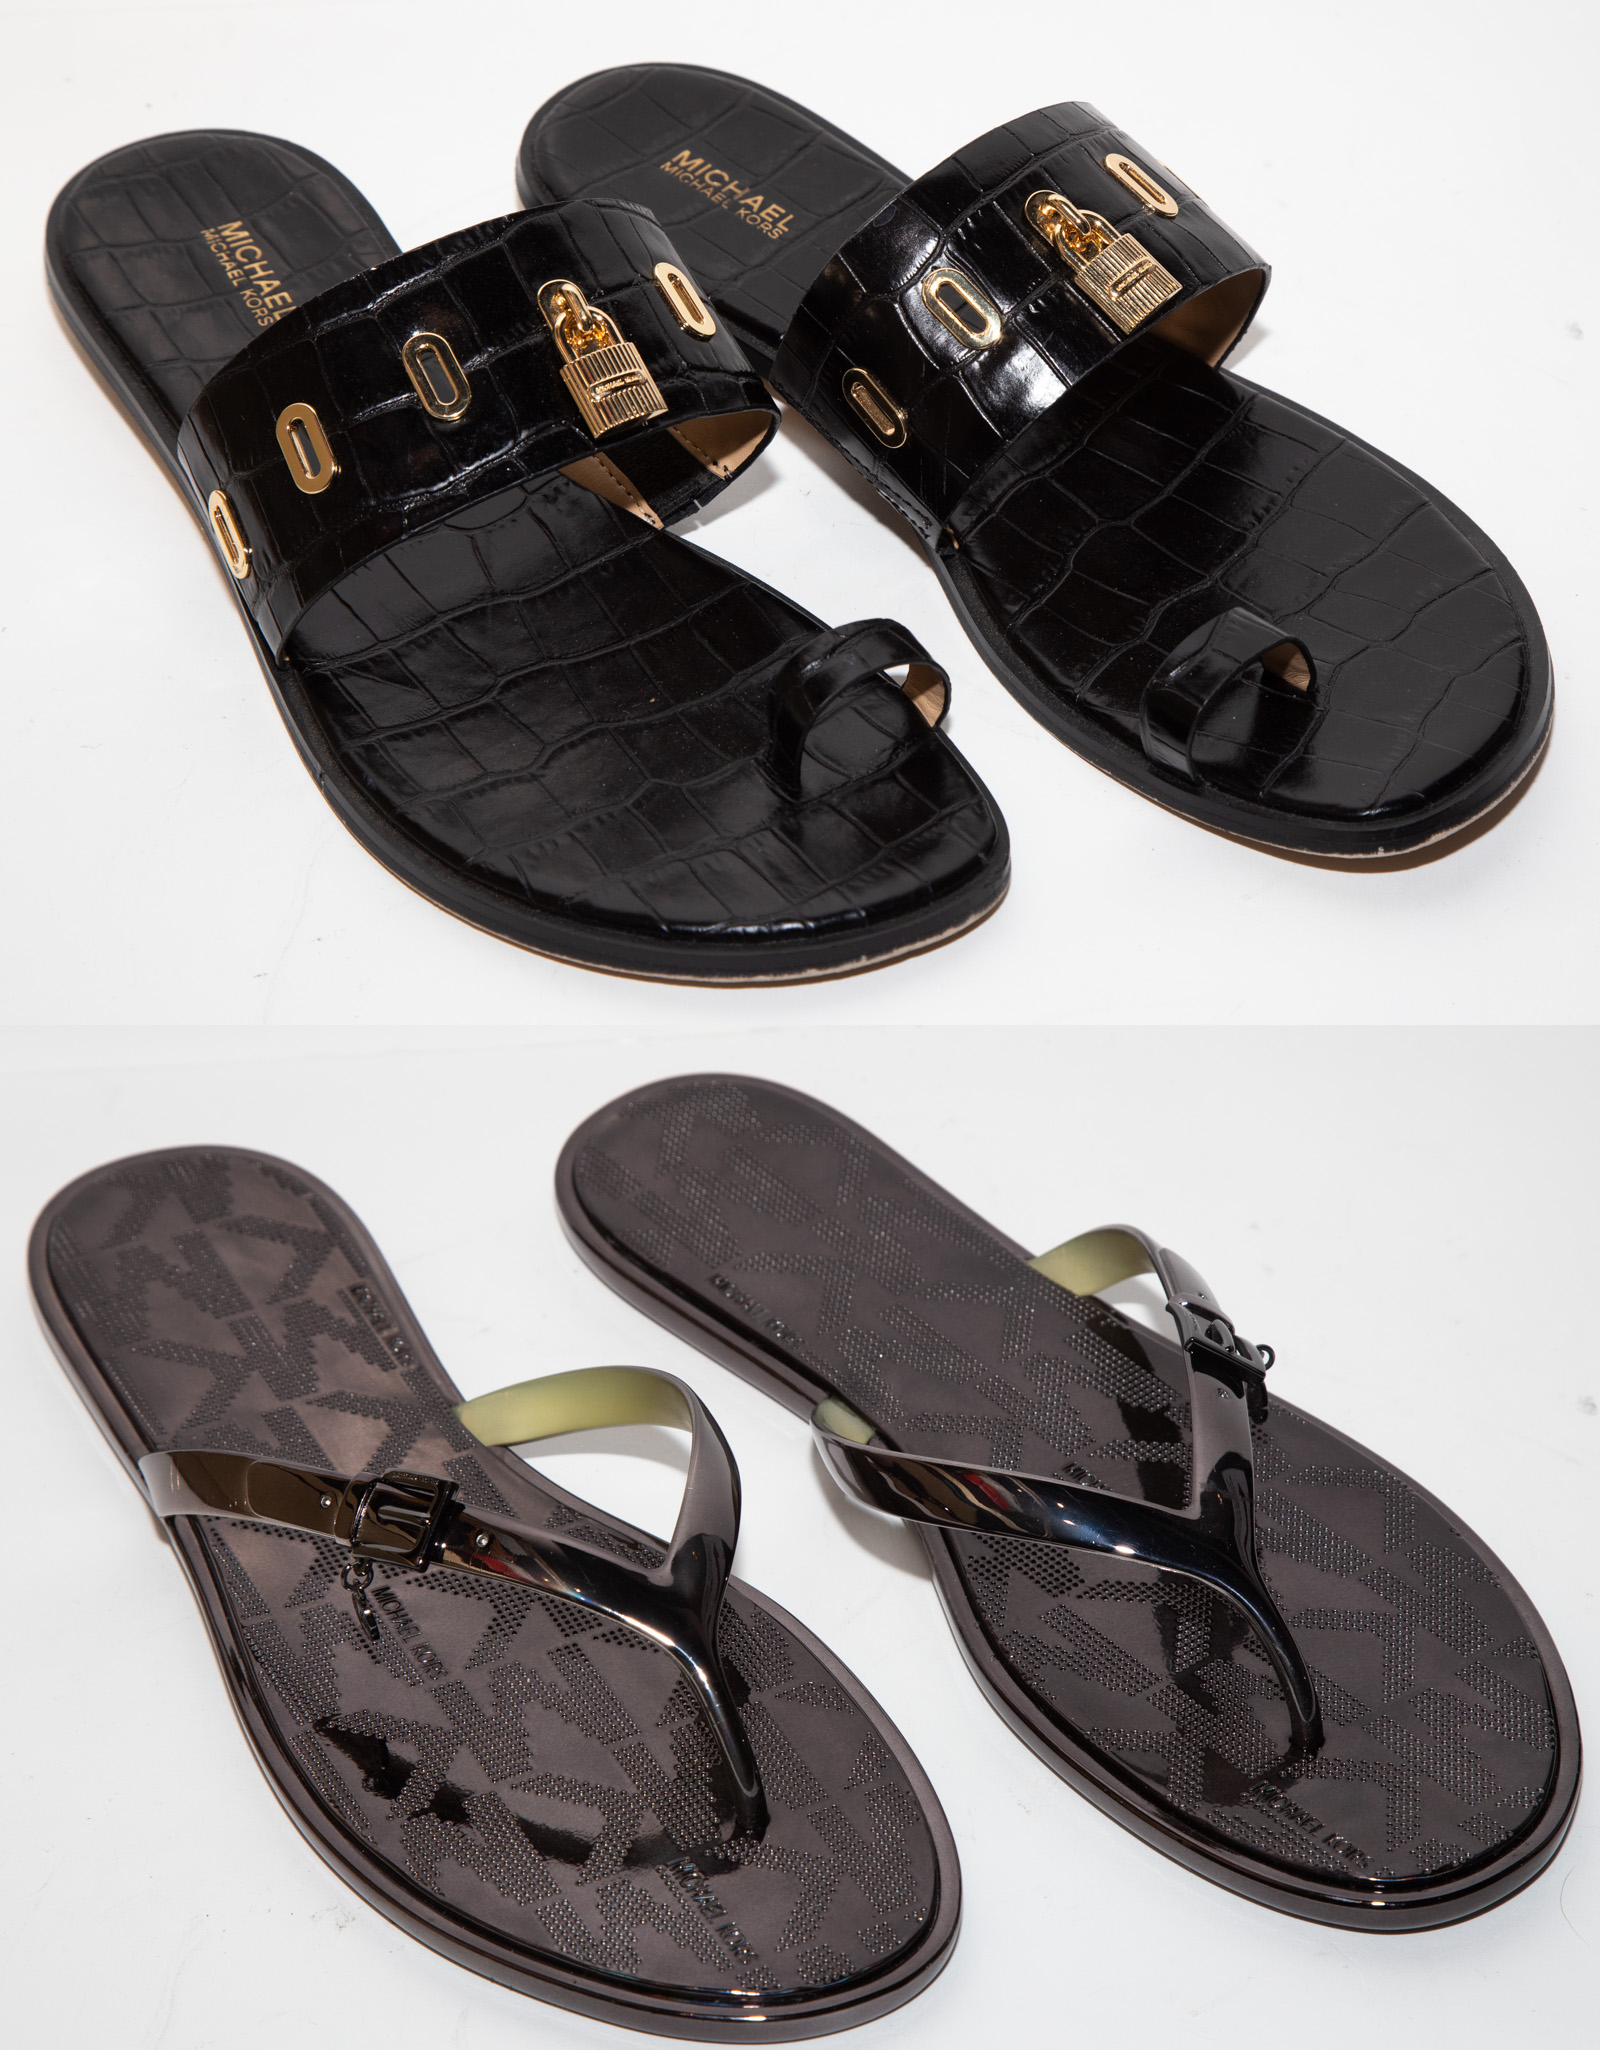 TWO PAIRS MICHAEL KORS SANDALS including